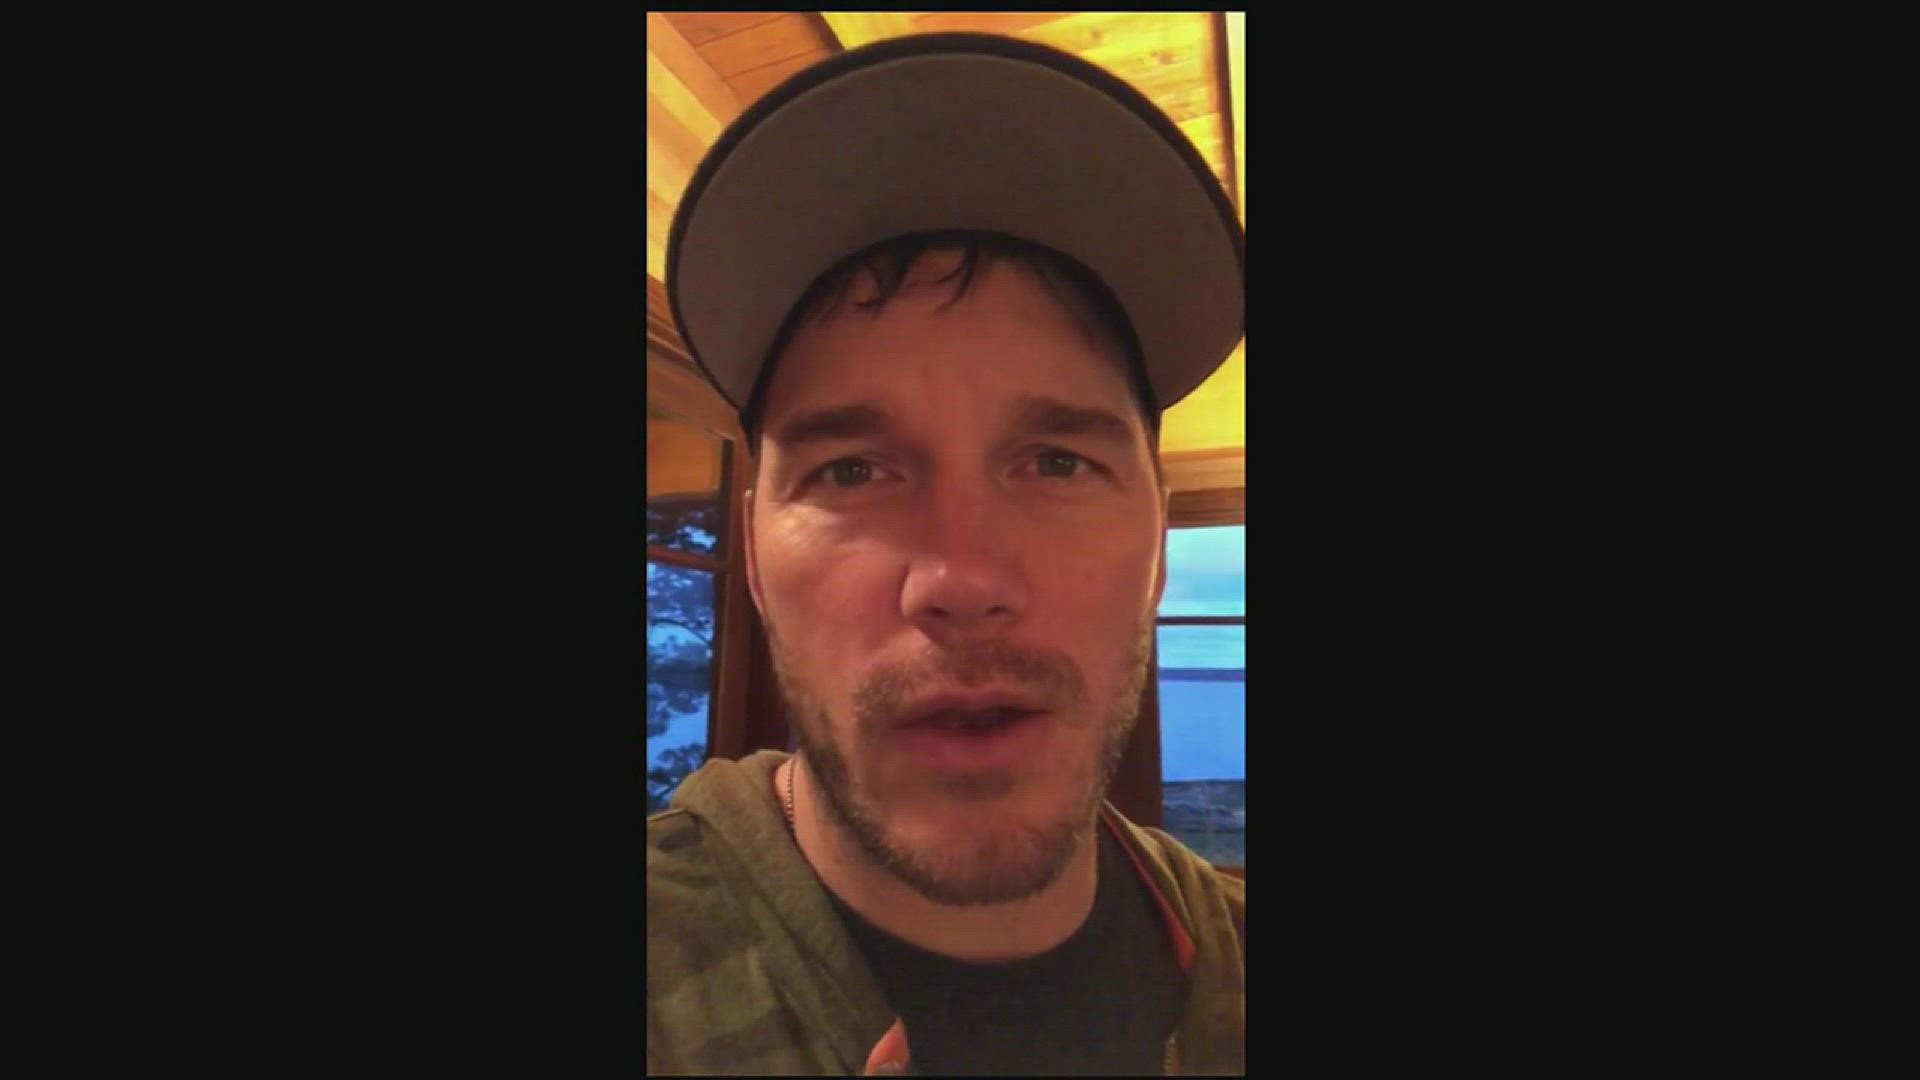 Chris Pratt send a video message to Declan Reagan and his brother Adrian after learning of Declan's cancer battle and their love of dinosaurs.